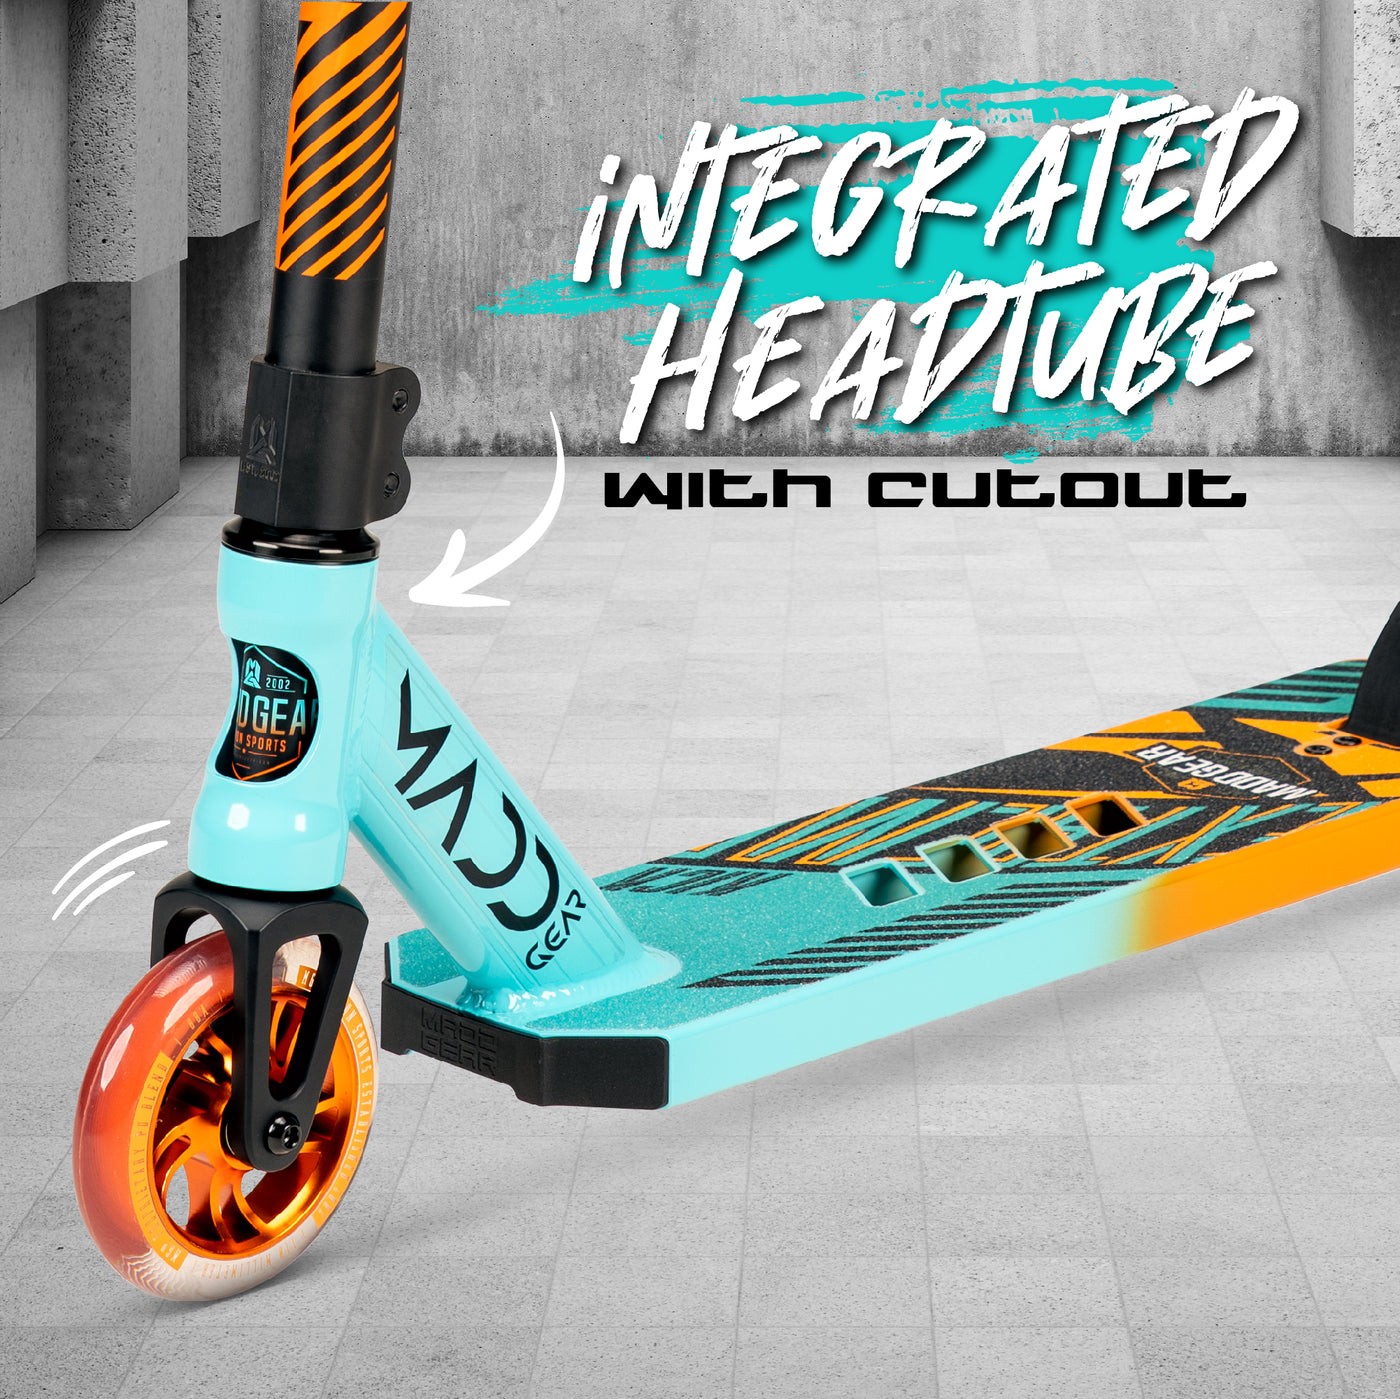 Madd Gear MGP Kick Extreme Stunt Scooter Complete High Quality Razor Pro Trick Skate Park Mad Teal Orange 5" Deck Integrated Headtube with Cutout